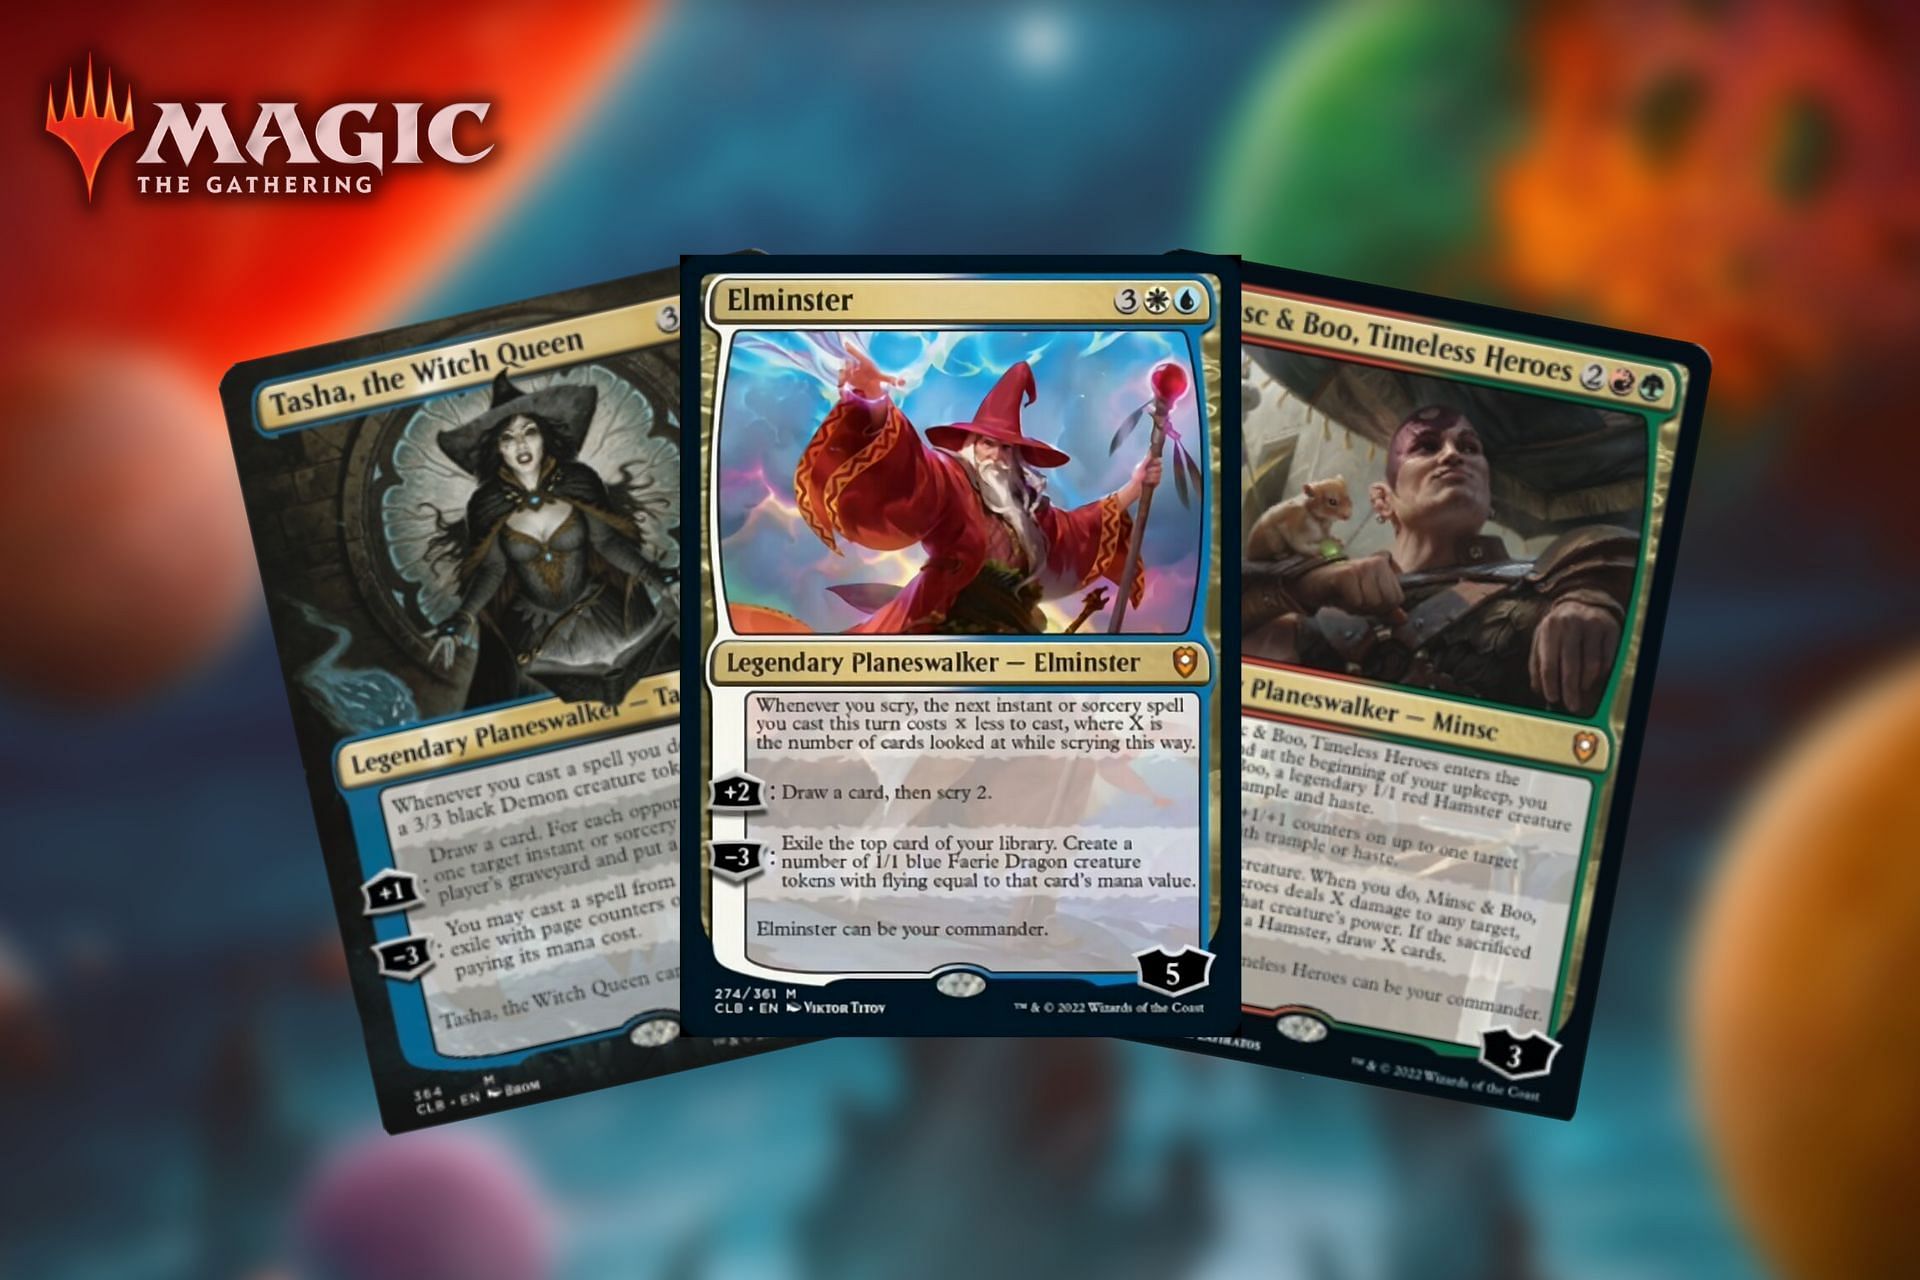 Magic: The Gathering has some wonderful new cards in its upcoming set, such as brand-new planeswalkers (Image via Sportskeeda)